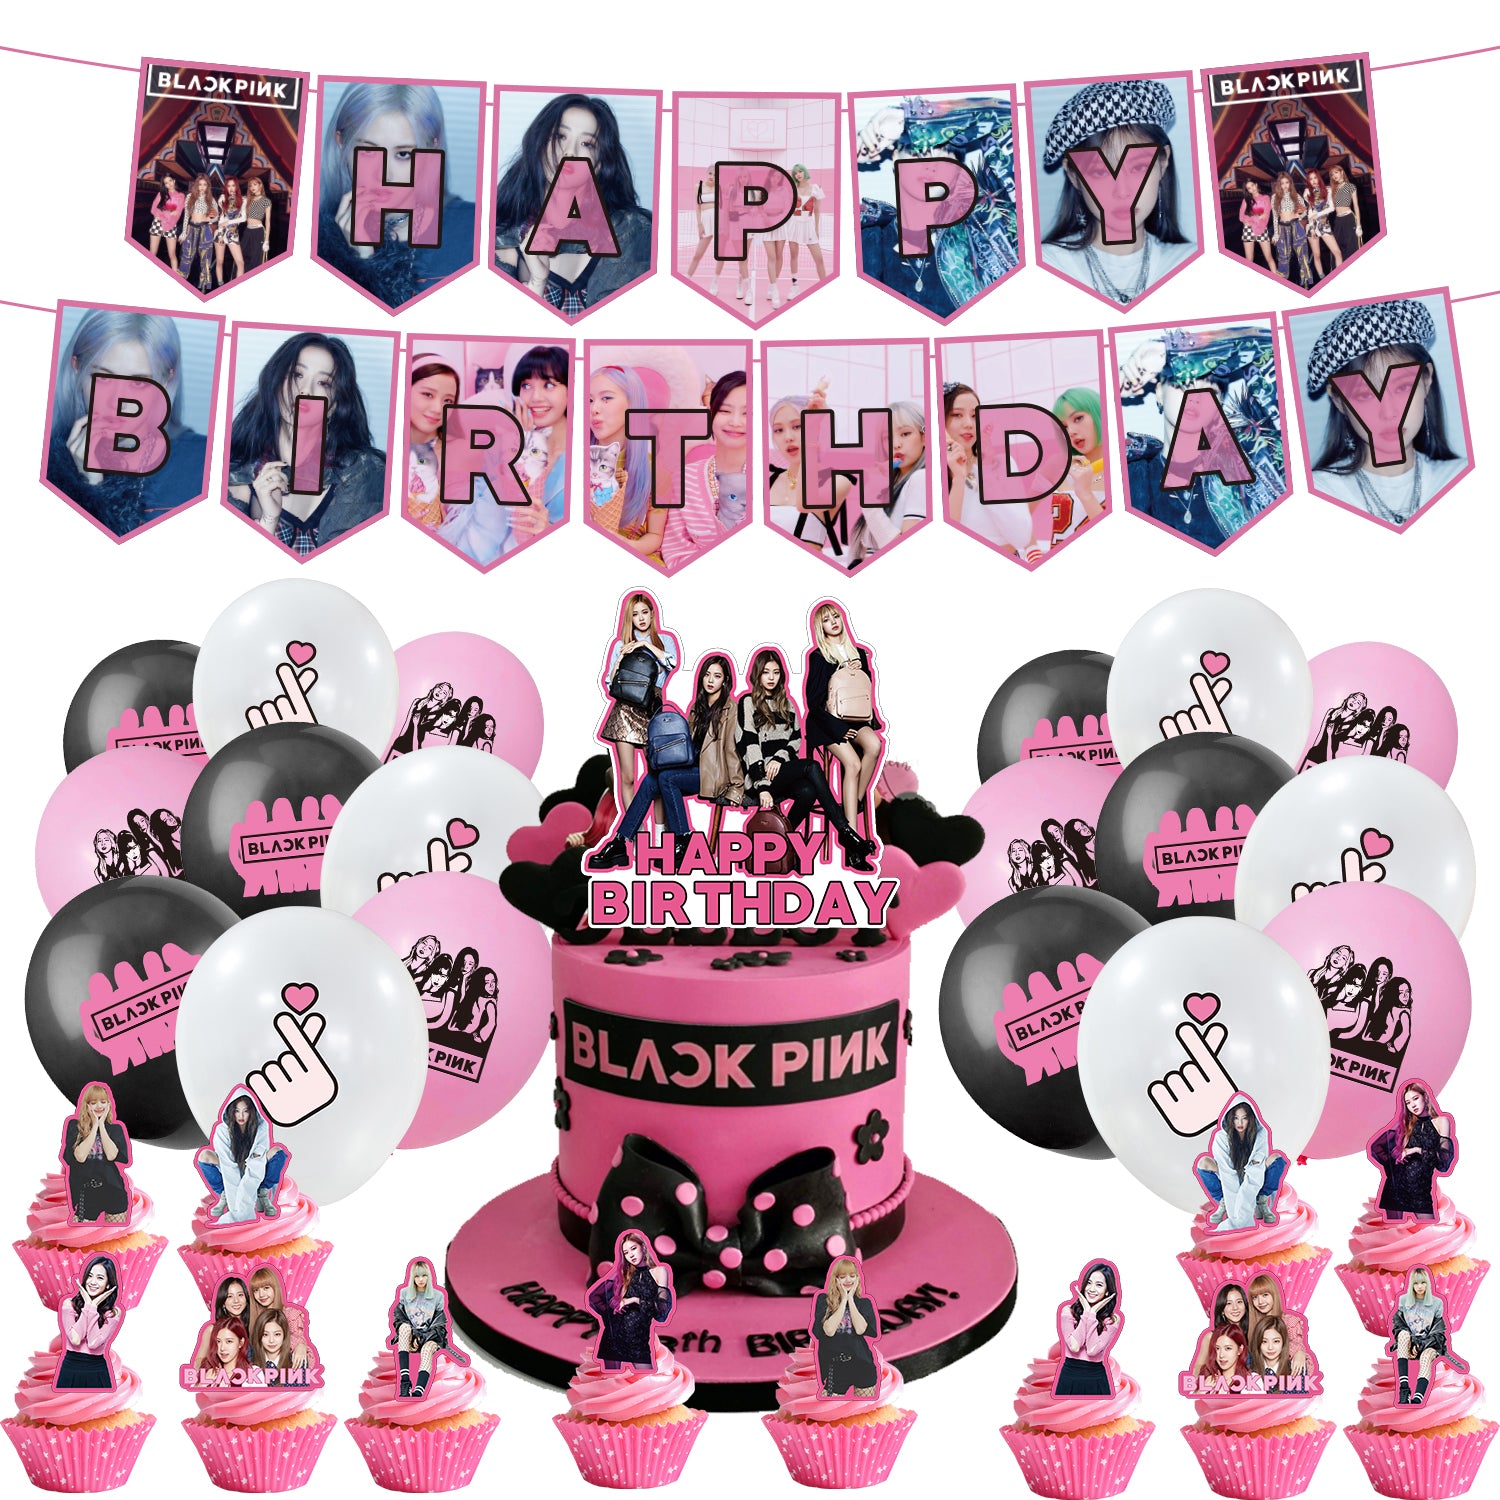 Black Pink Birthday Party Decorations.